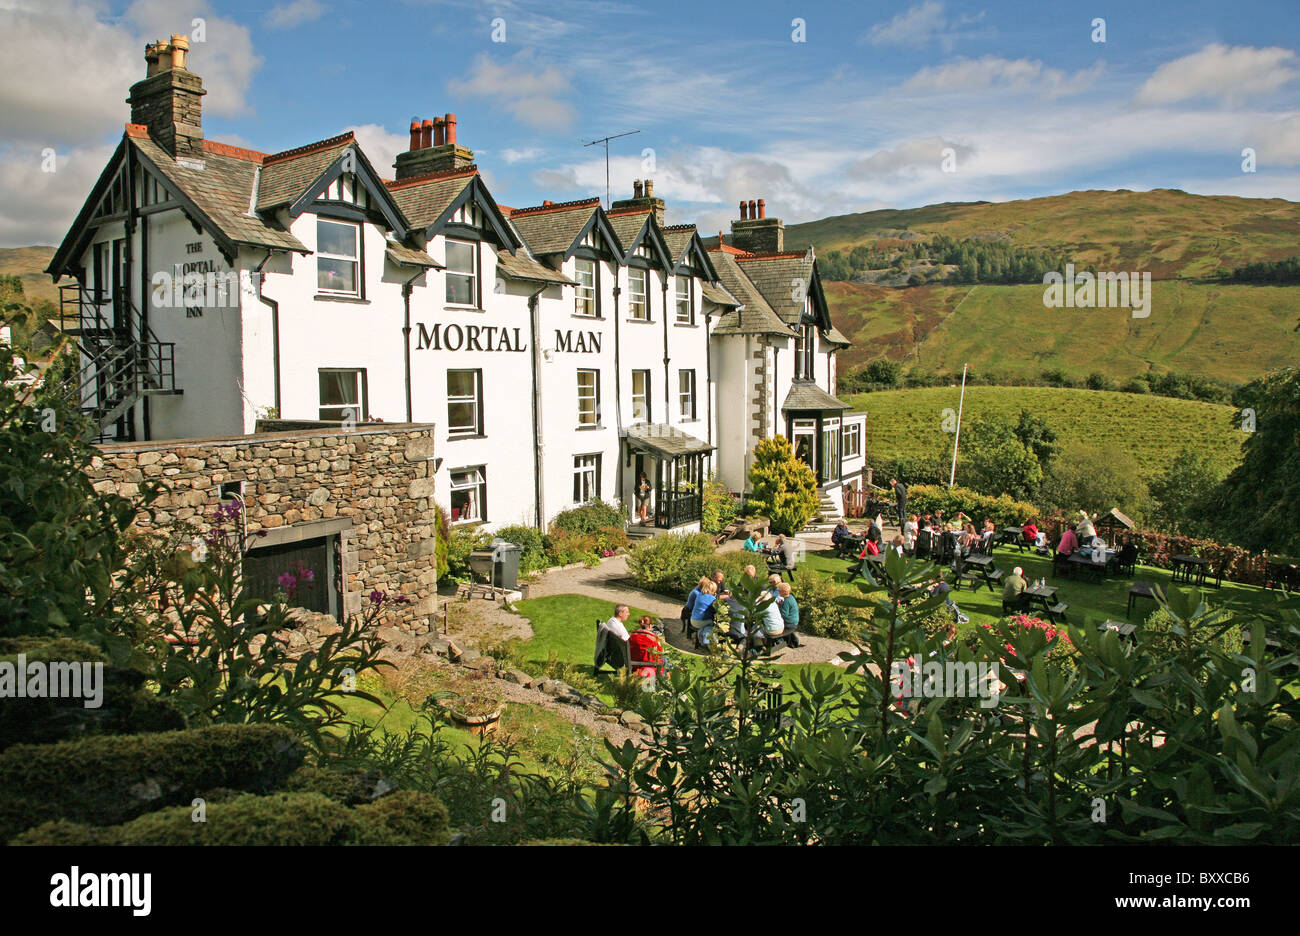 The Mortal Man pub, inn or public house, with people eating and drinking outside at Troutbeck in the English Lake District Cumbria England UK Stock Photo